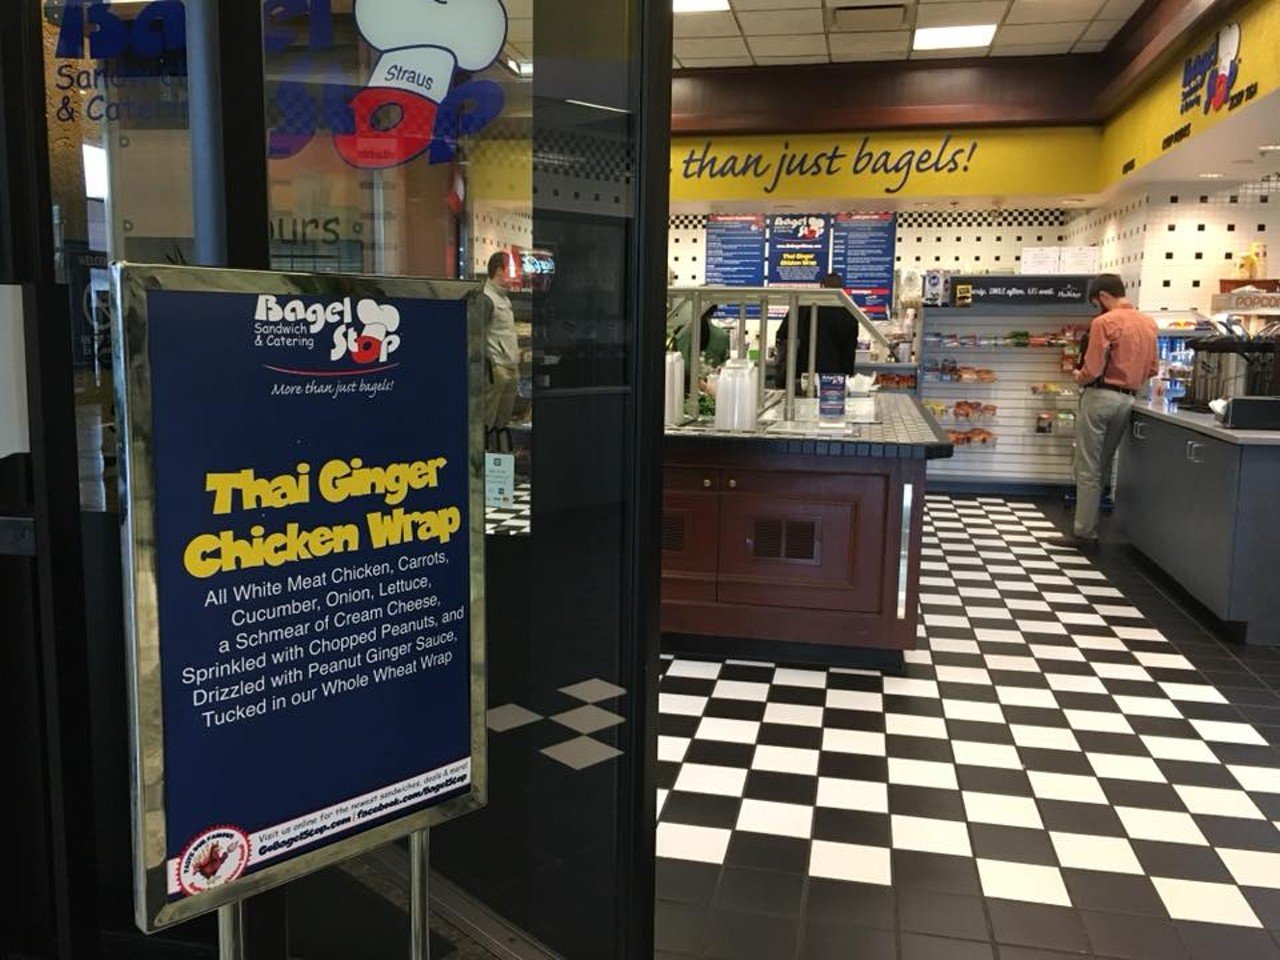 The Bagel Stop 
312 Elm St., Downtown
Bagel Stop has served breakfast and lunches in downtown Cincinnati for over 20 years.  Their sandwiches are made to order and are great for catering events. Some of their signature items include their Turkey Zinger and Corned Beef Reuben.